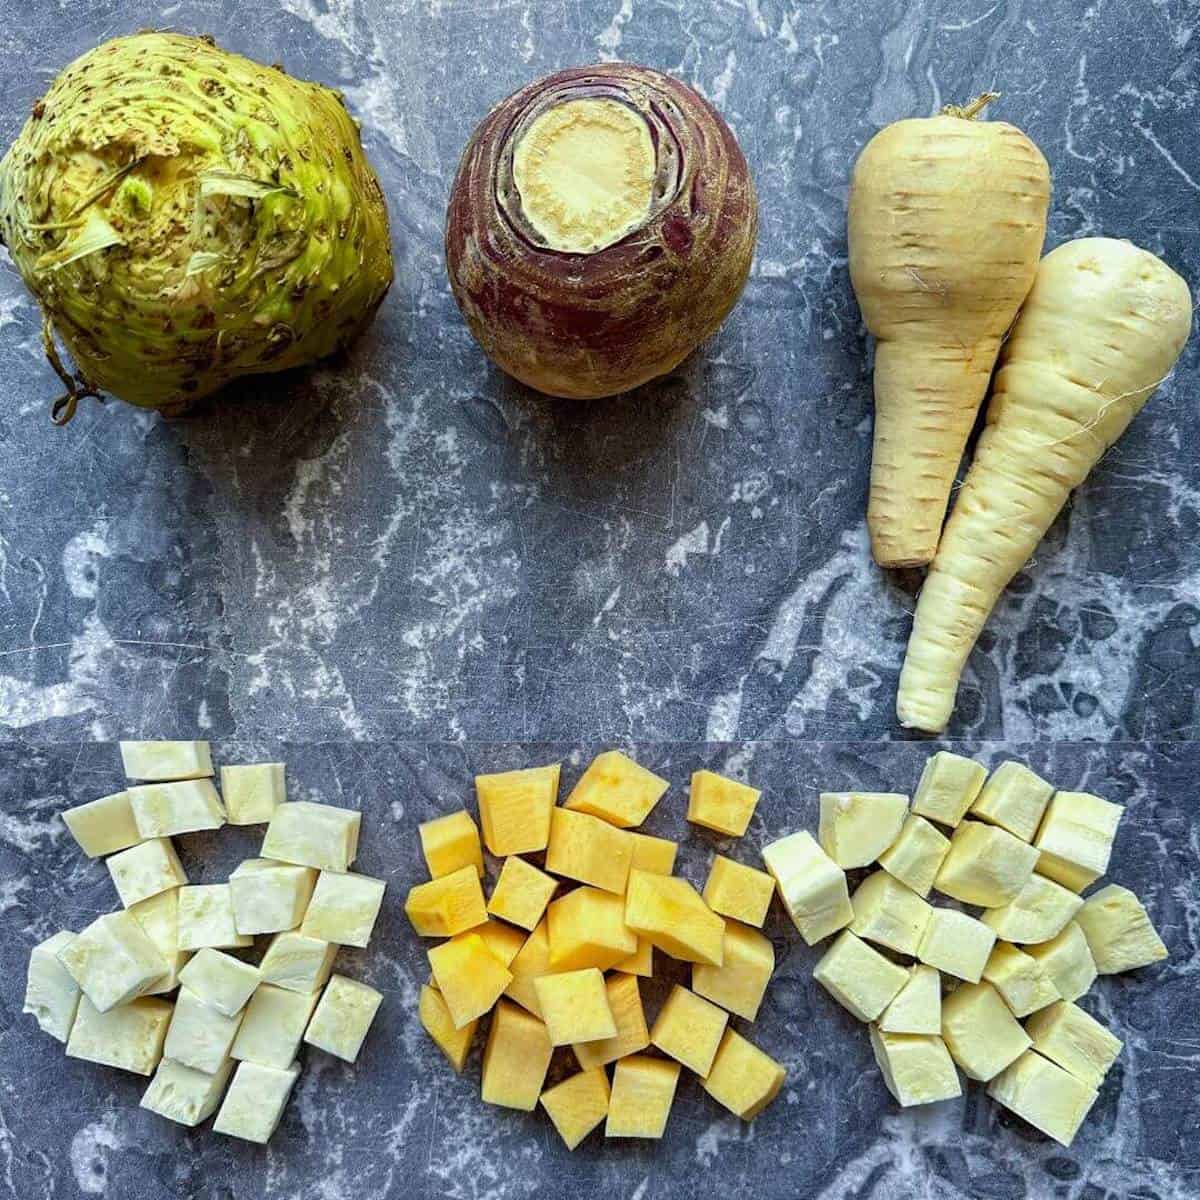 Similar sized cubes of celeriac, swede and parsnip next to the whole unpeeled root vegetables. 